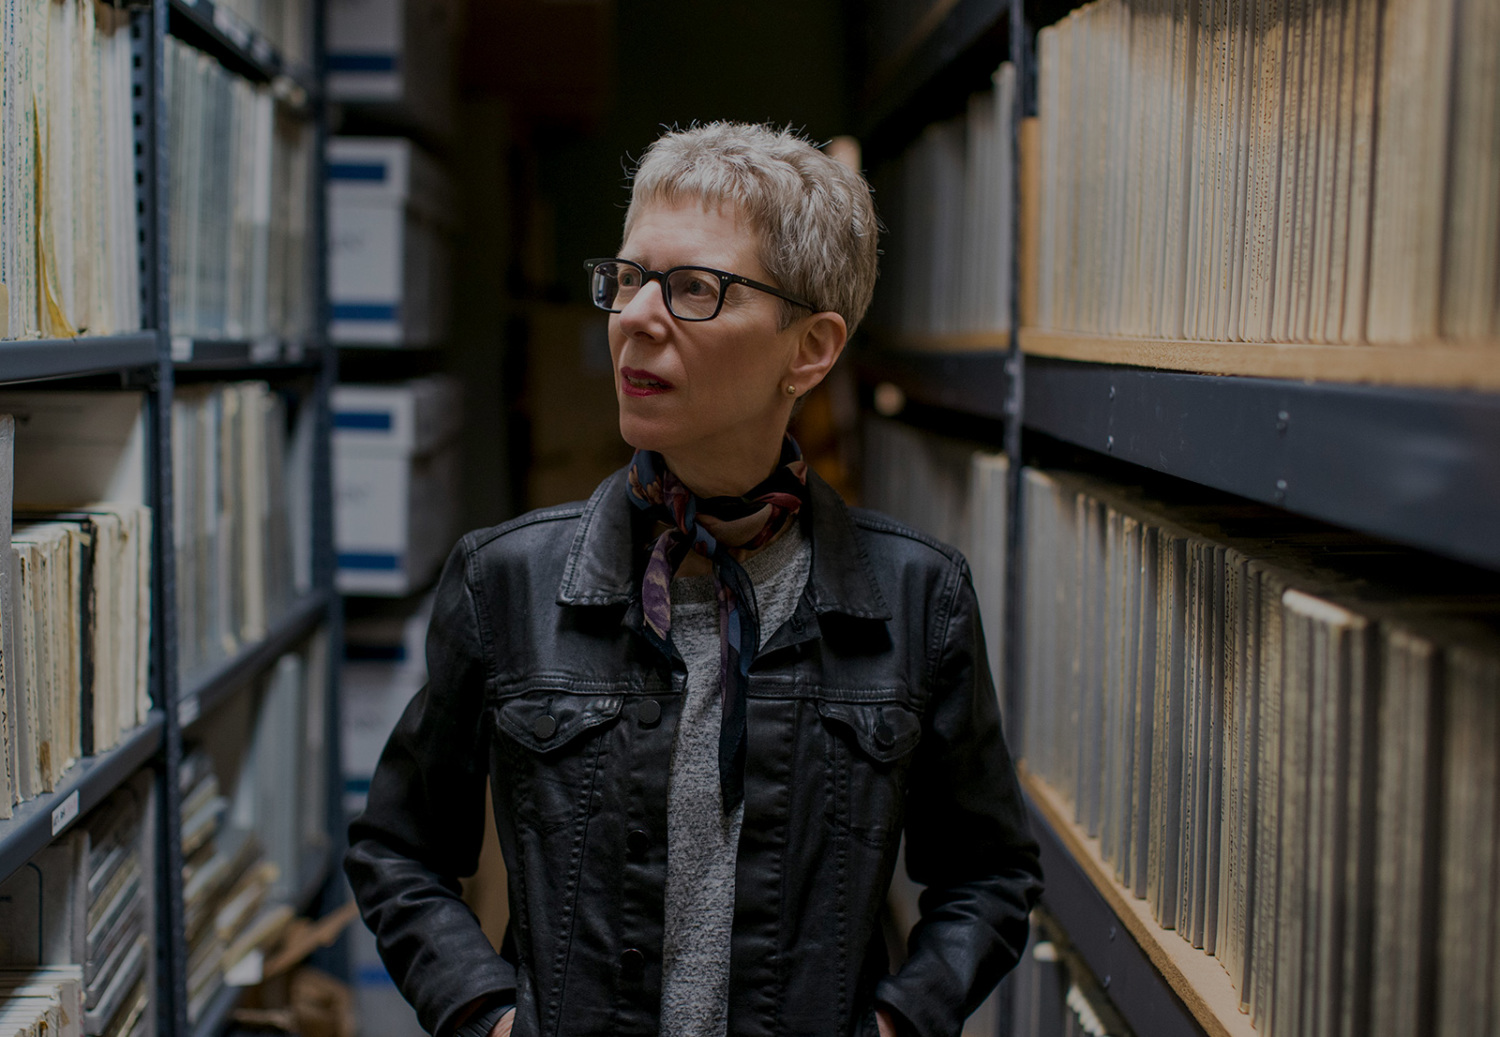 Image of Terry Gross